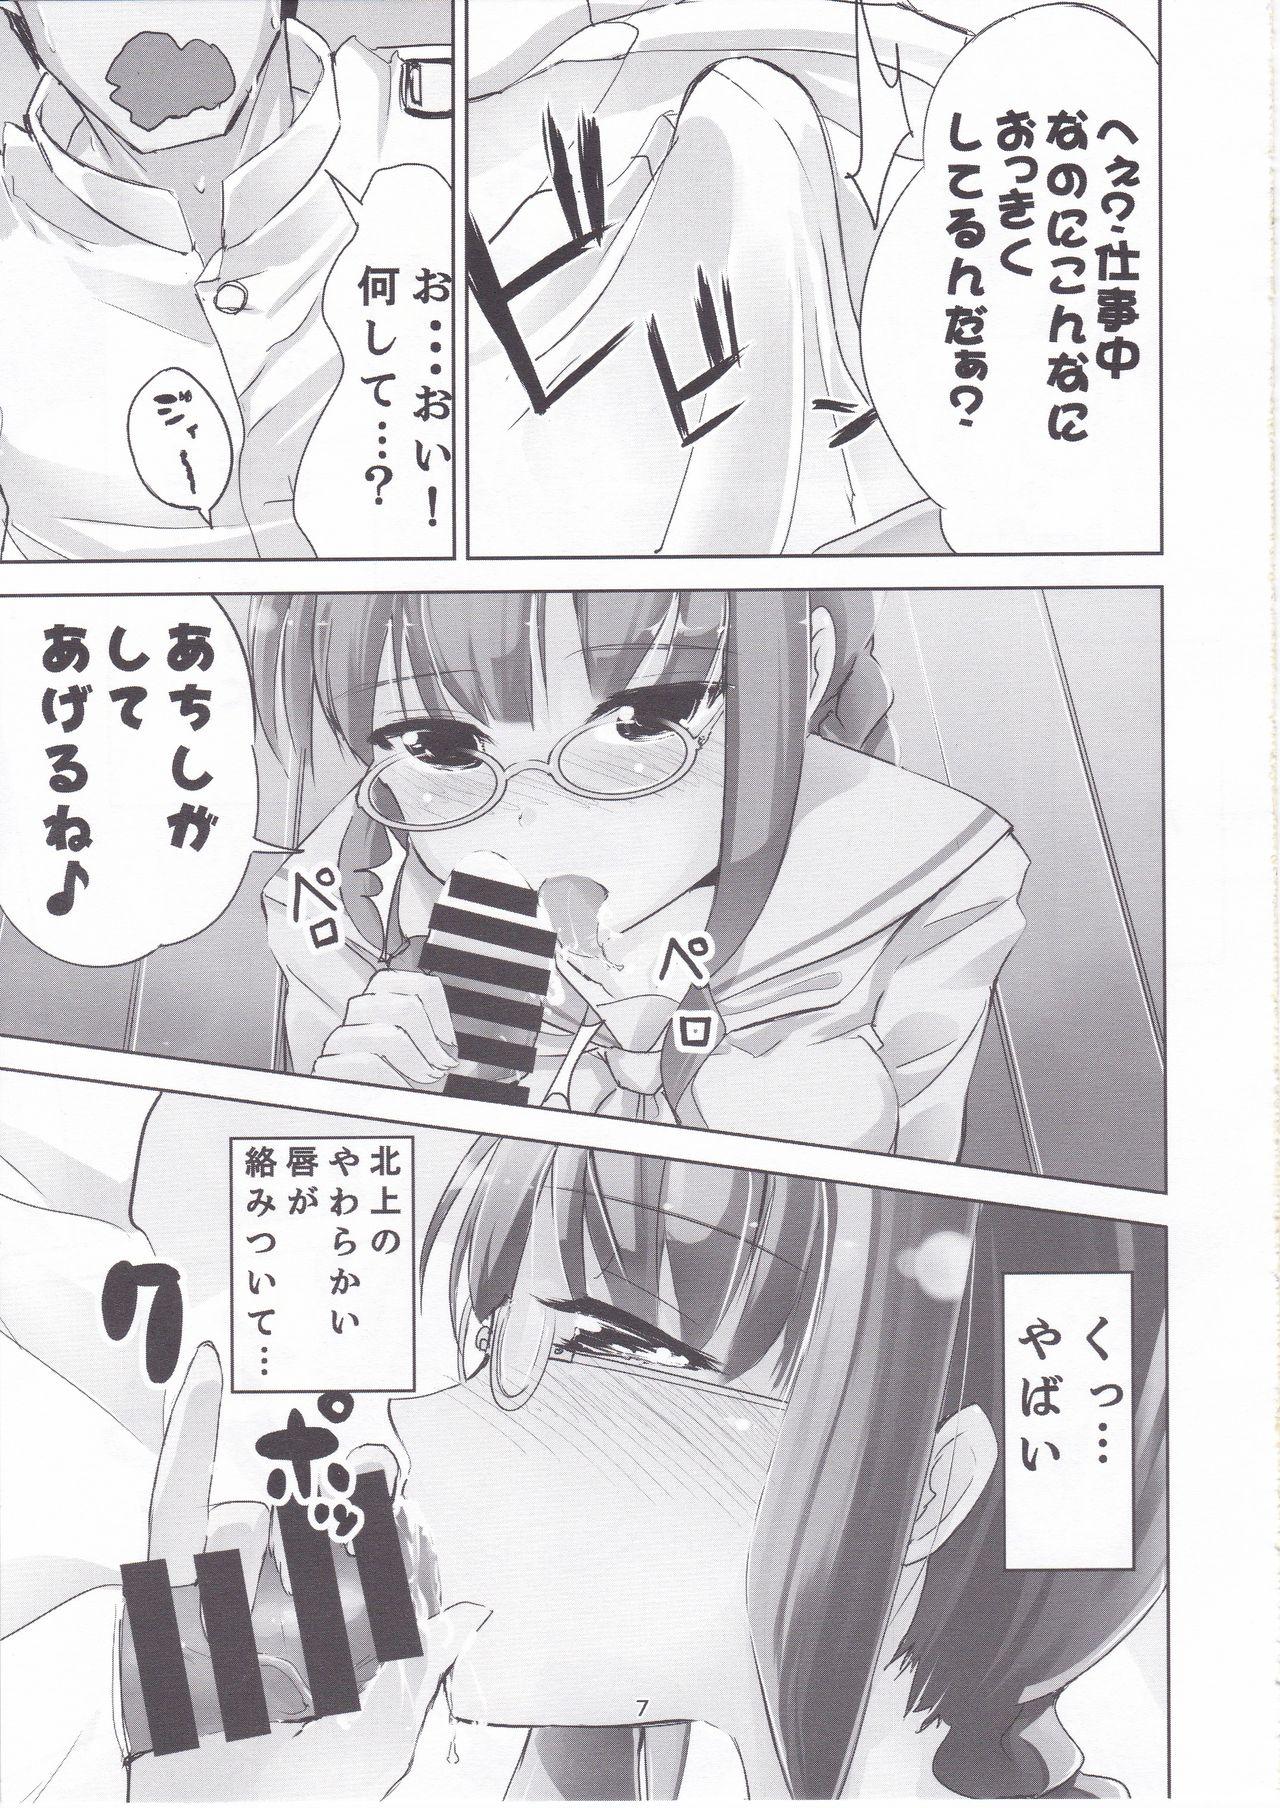 Culo KanColle Soushuuhen Ichi - Kantai collection Blowing - Page 6